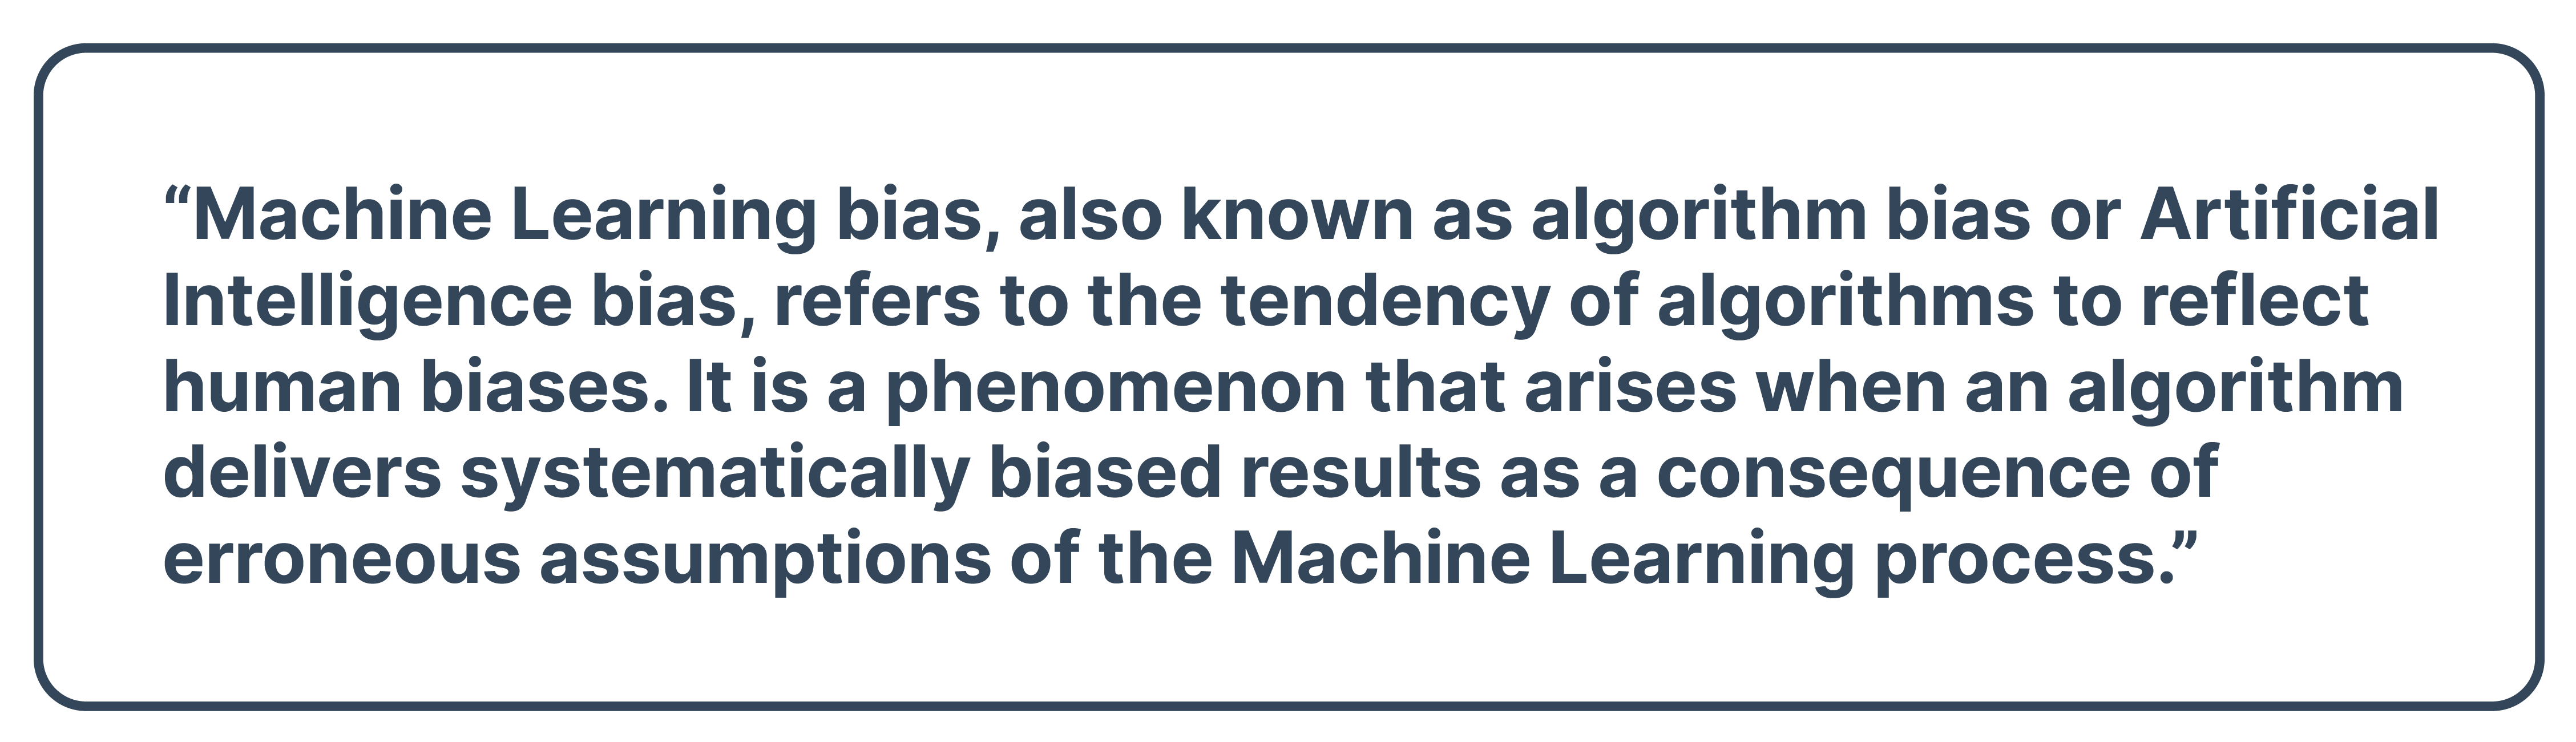 “Machine Learning bias, also known as algorithm bias or Artificial Intelligence bias, refers to the tendency of algorithms to reflect human biases. It is a phenomenon that arises when an algorithm delivers systematically biased results as a consequence of erroneous assumptions of the Machine Learning process.”